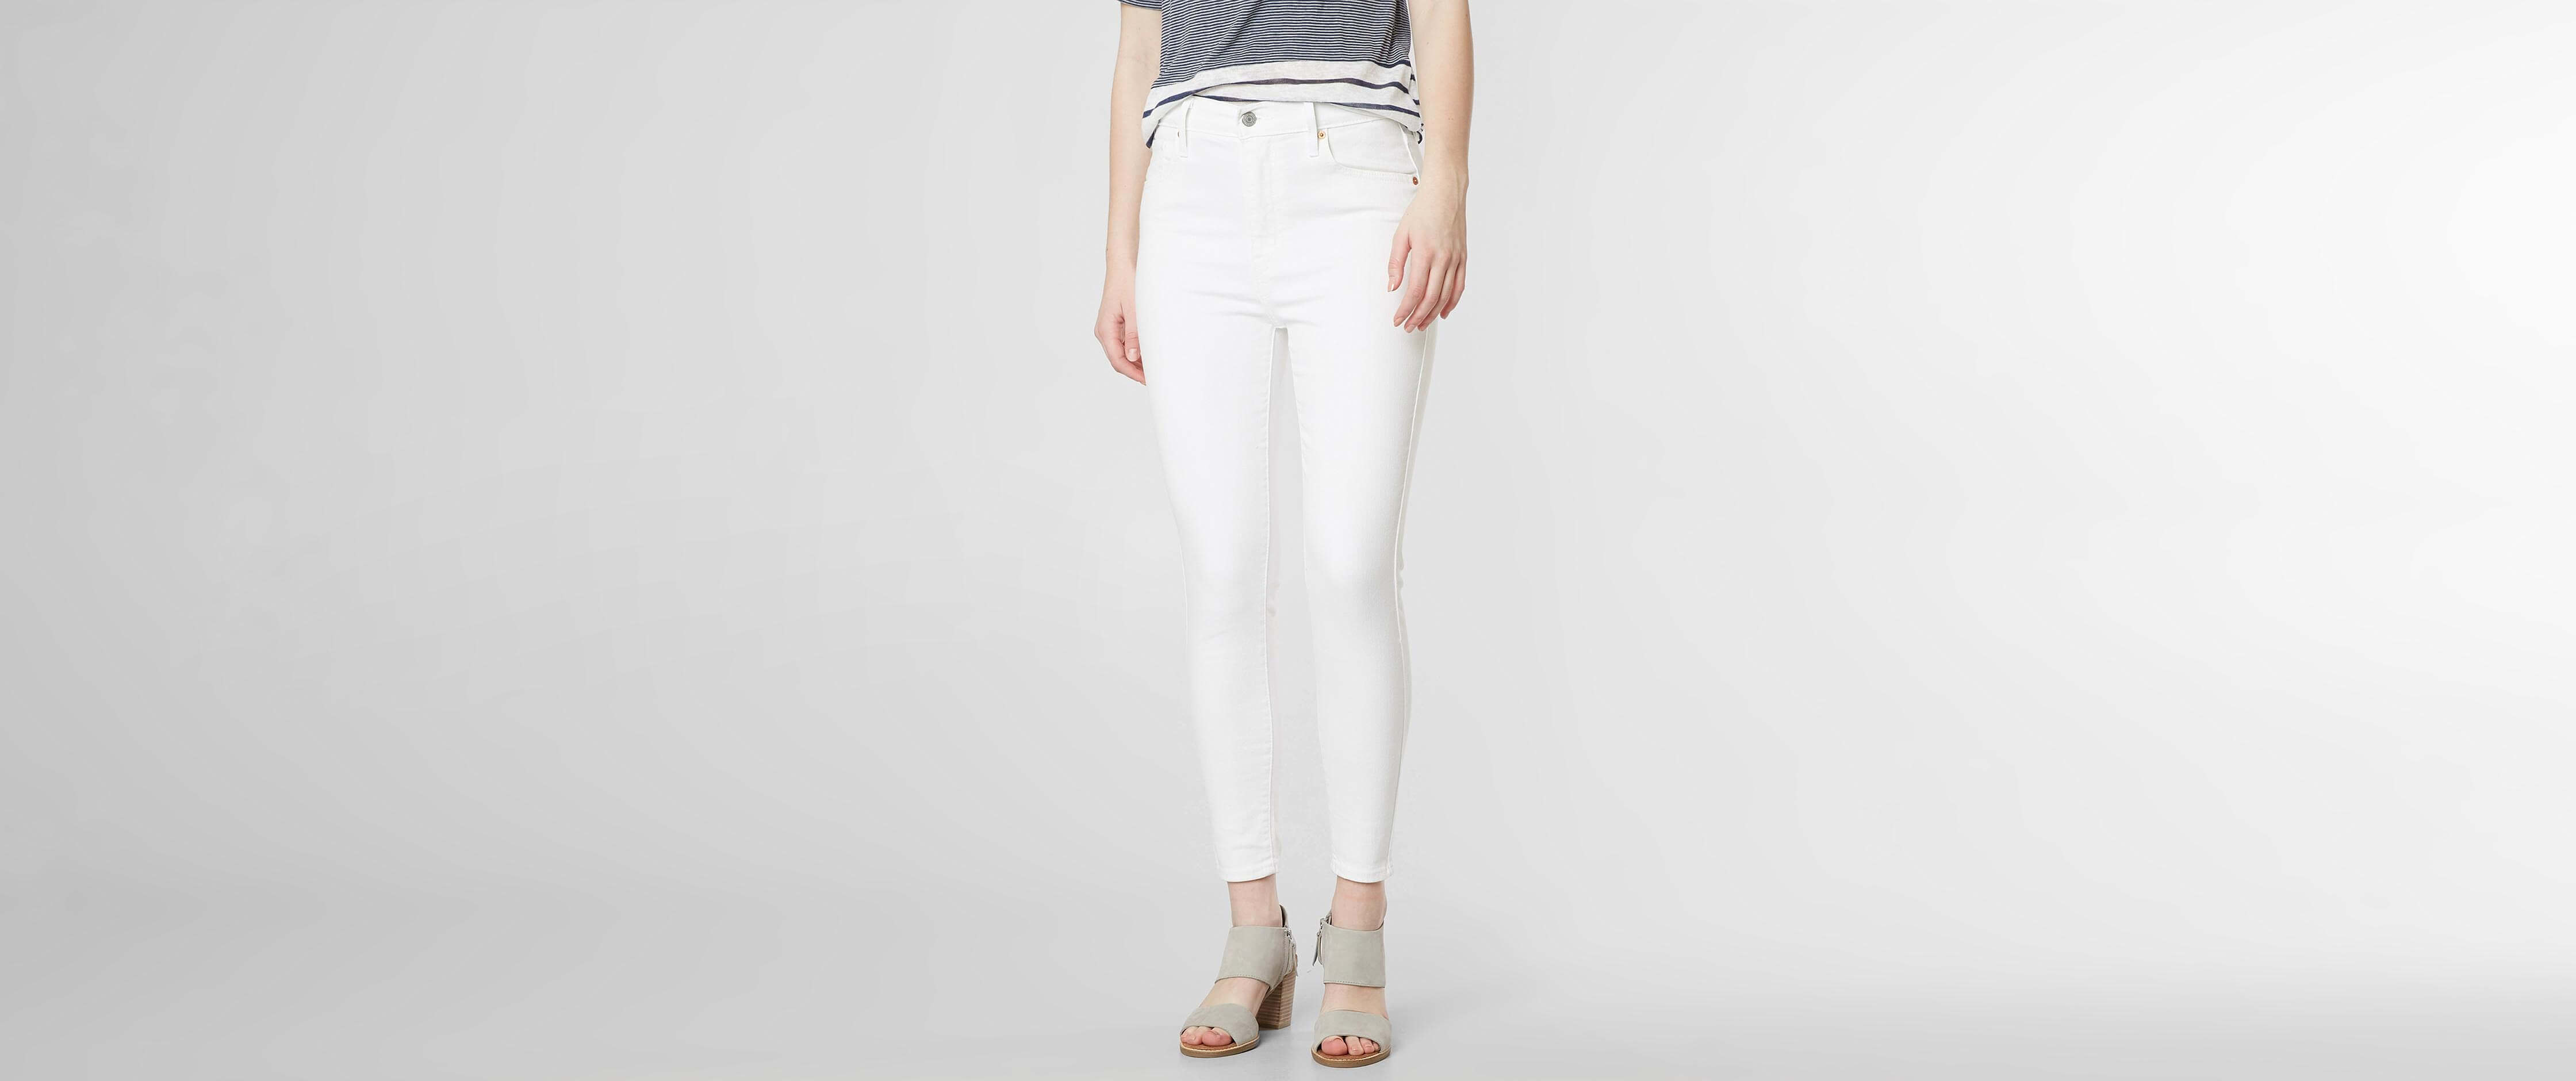 levi's women's mile high ankle skinny jeans